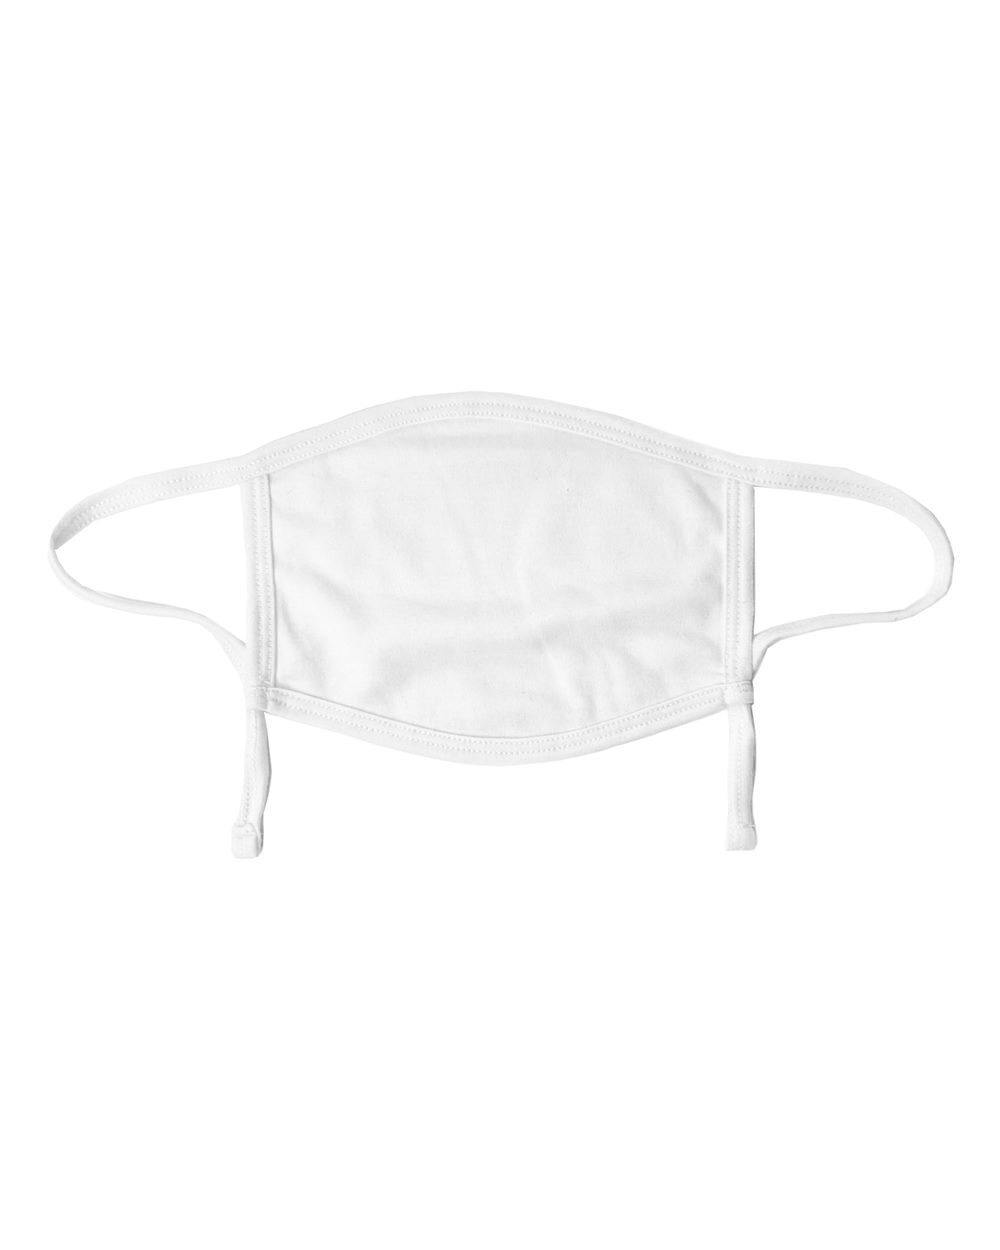 ValuMask Youth Polyester Adjustable-